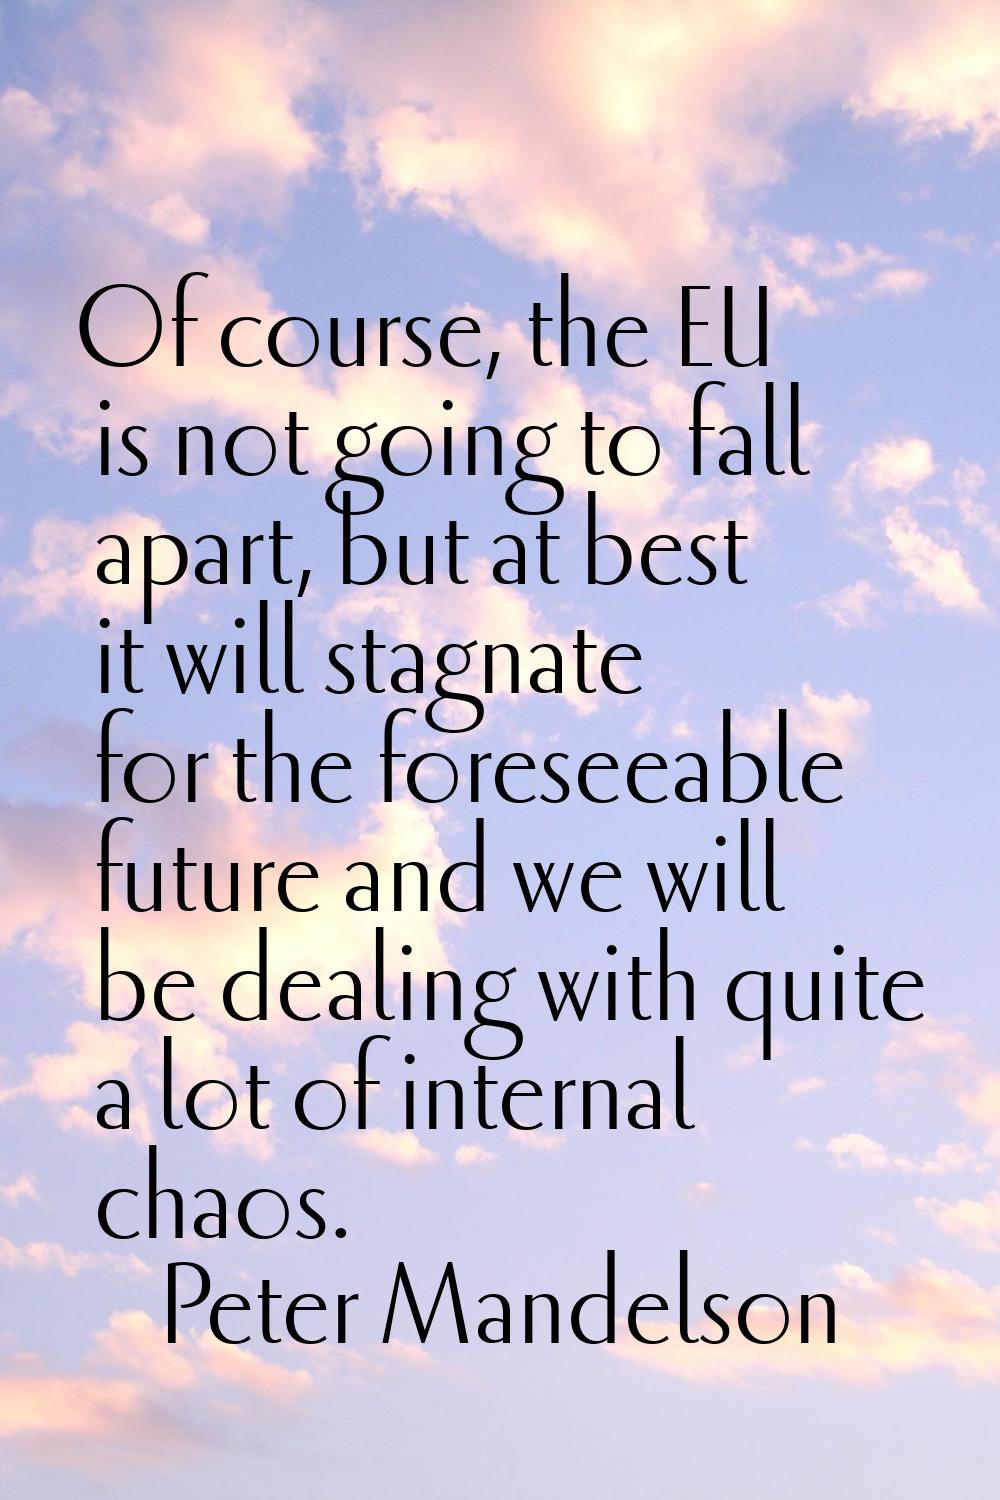 Of course, the EU is not going to fall apart, but at best it will stagnate for the foreseeable futu